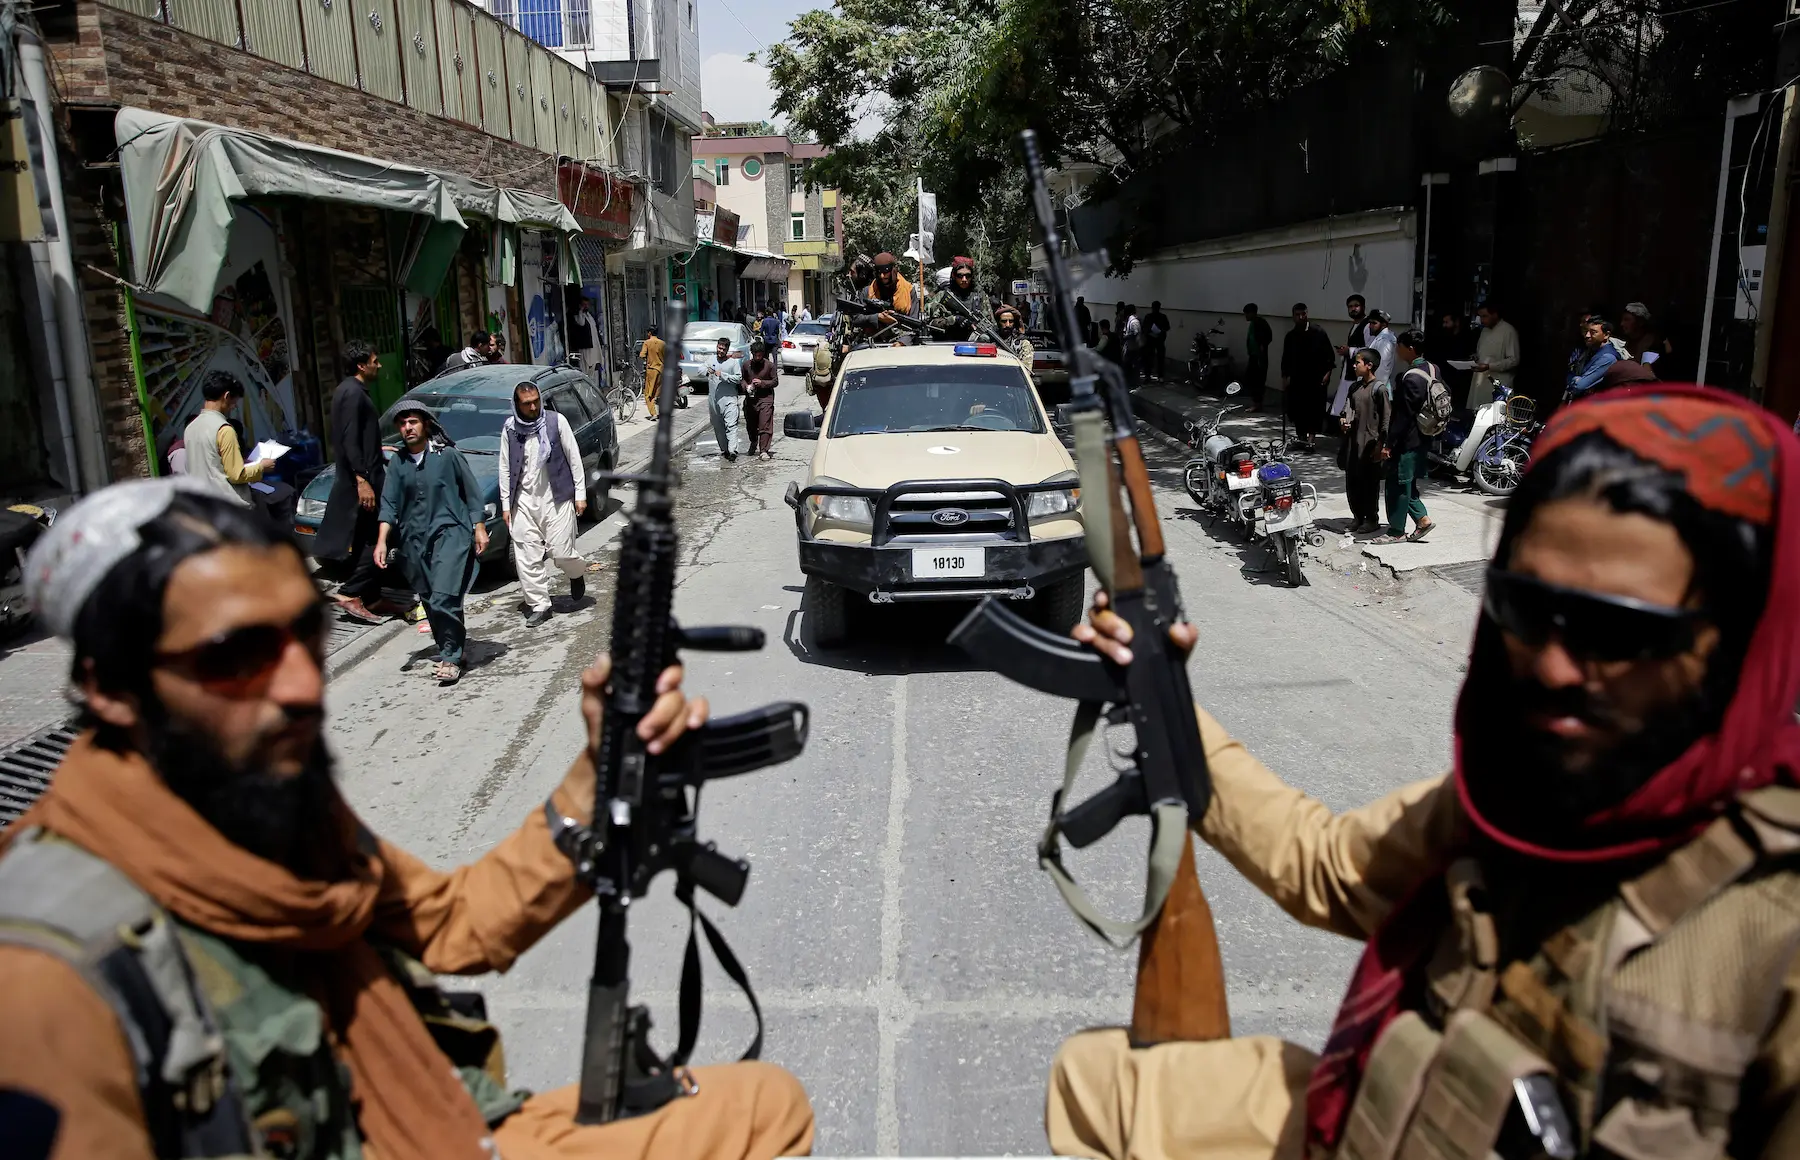 HRW Calls on Taliban to Stop Killings, Compensate Families